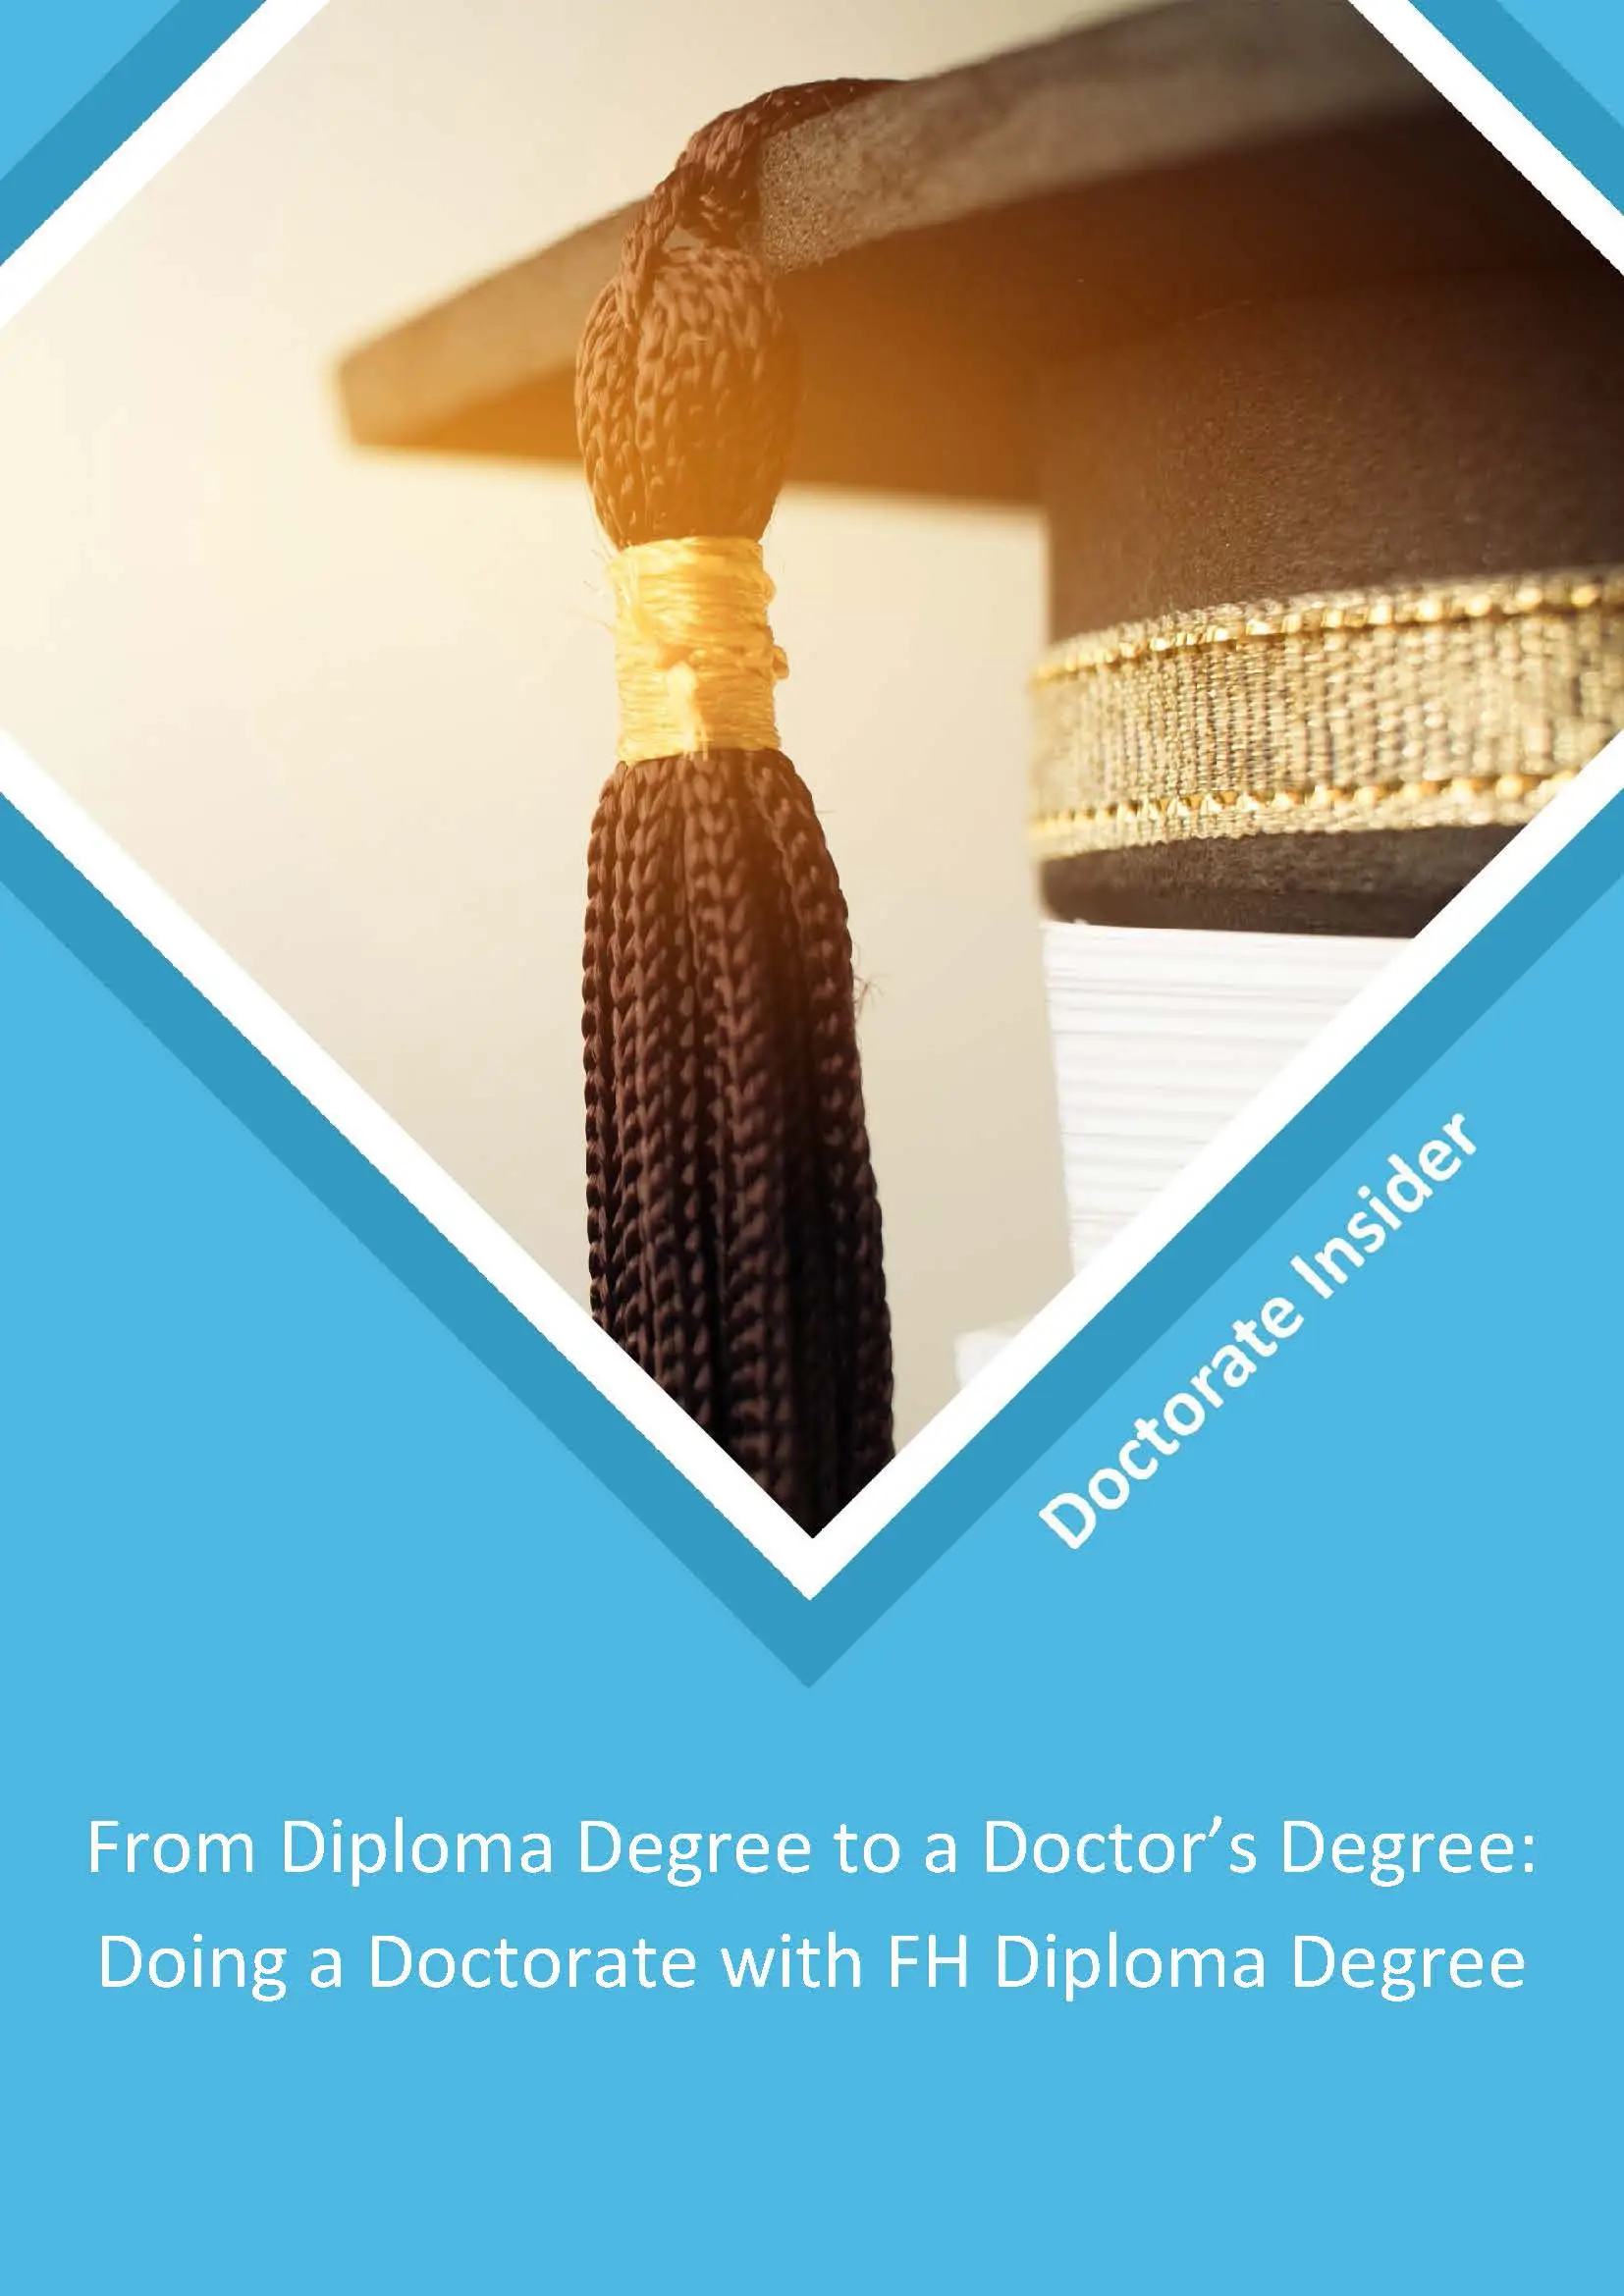 Doctorate Insider Guide From Diploma Degree to a Doctors Degree